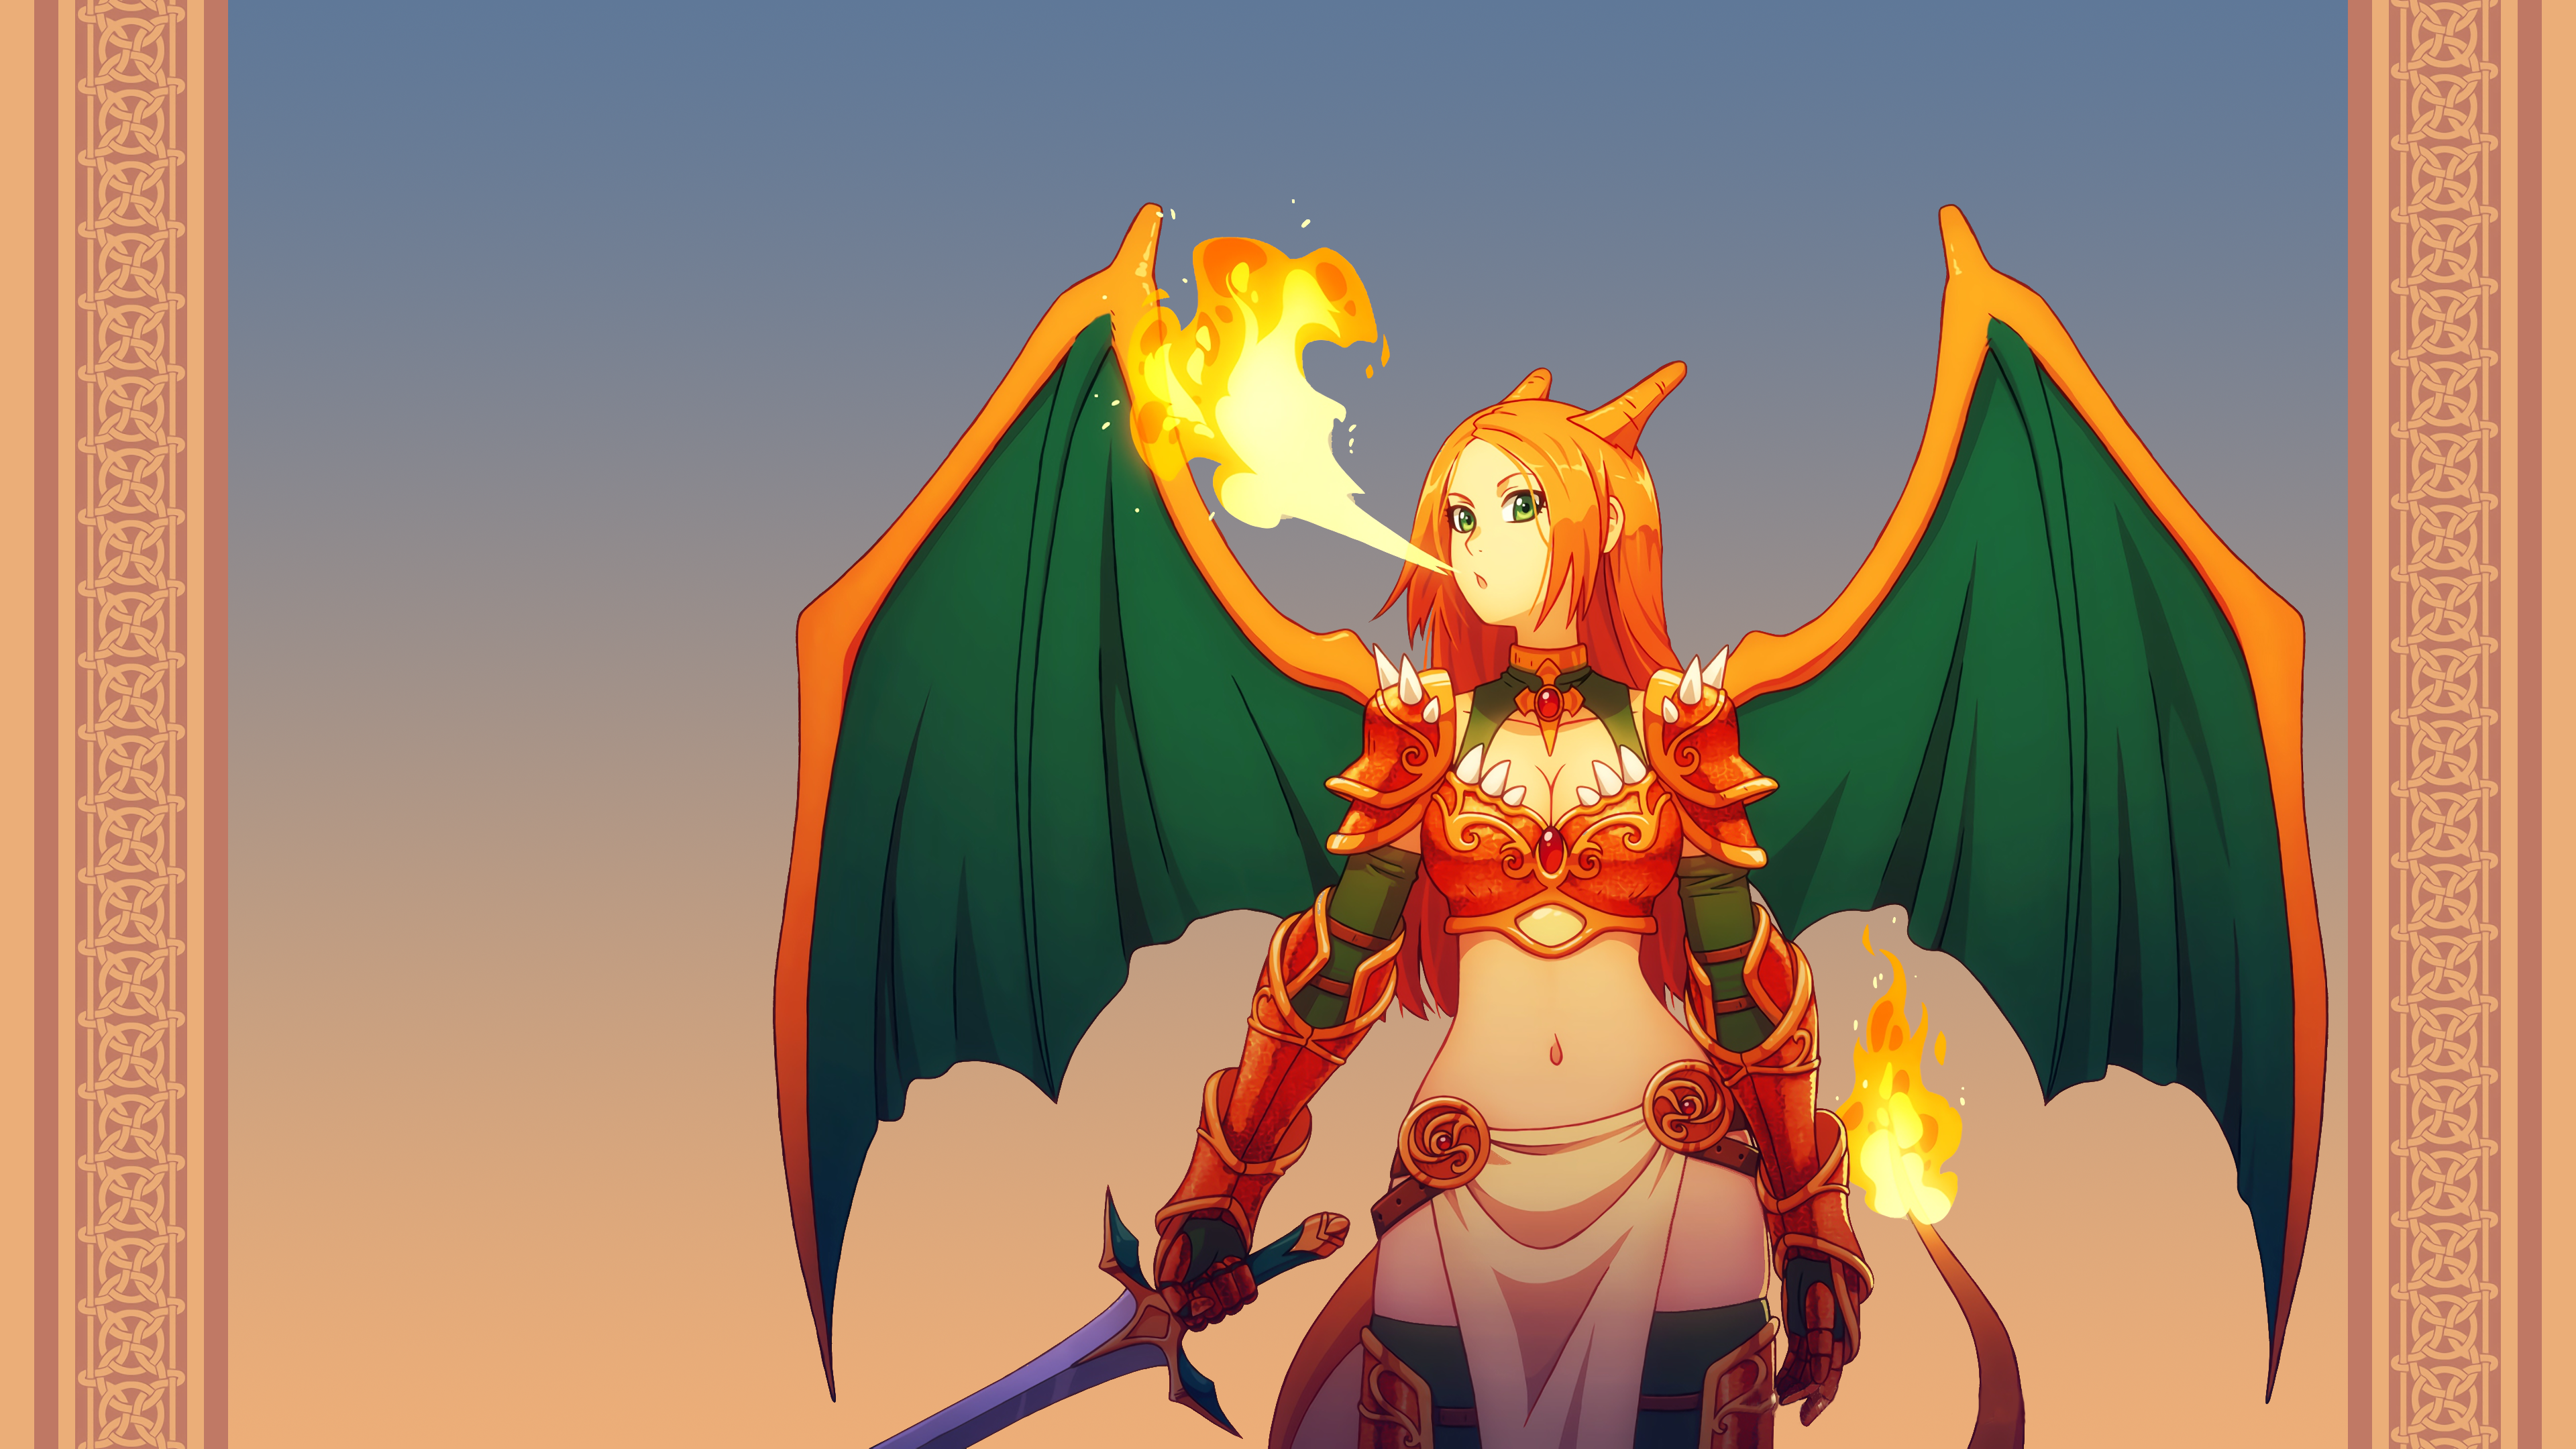 Anime 3840x2160 Pokémon Charizard anime girls anime fire boobs cleavage belly fantasy art fantasy girl sword weapon wings gradient simple background standing horns green eyes armor